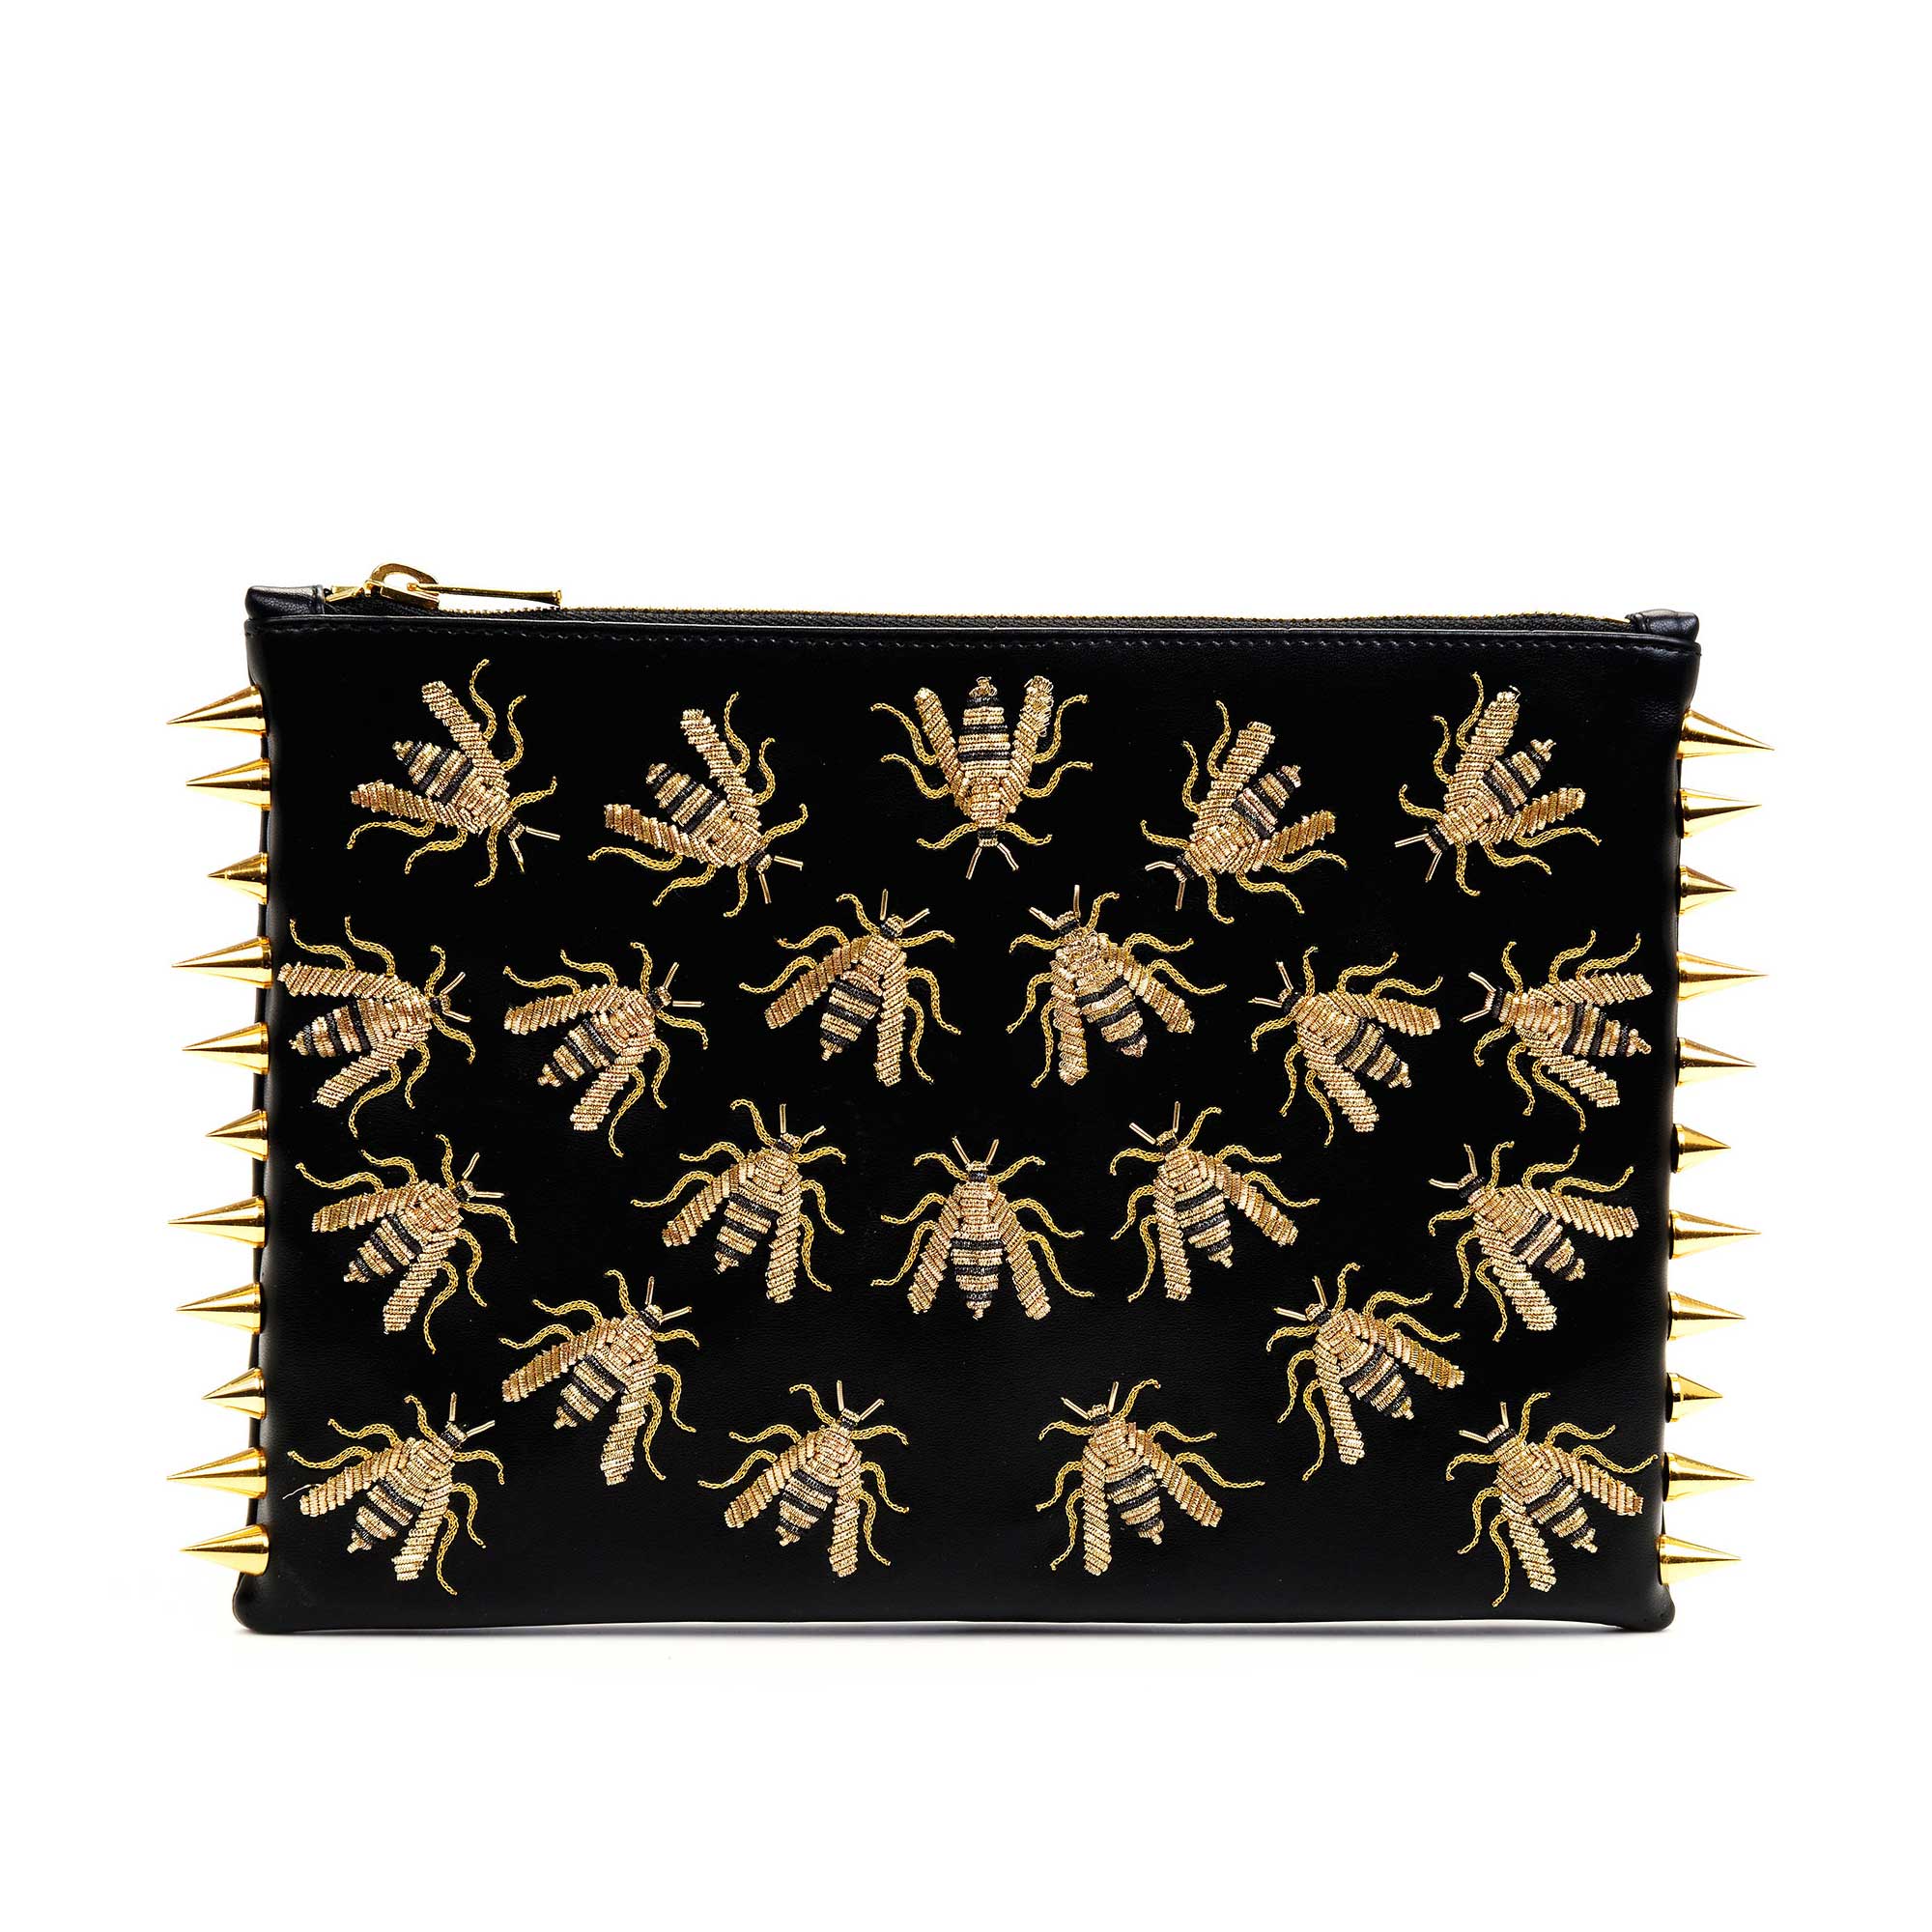 WASP EMBROIDERED CLUTCH BAG